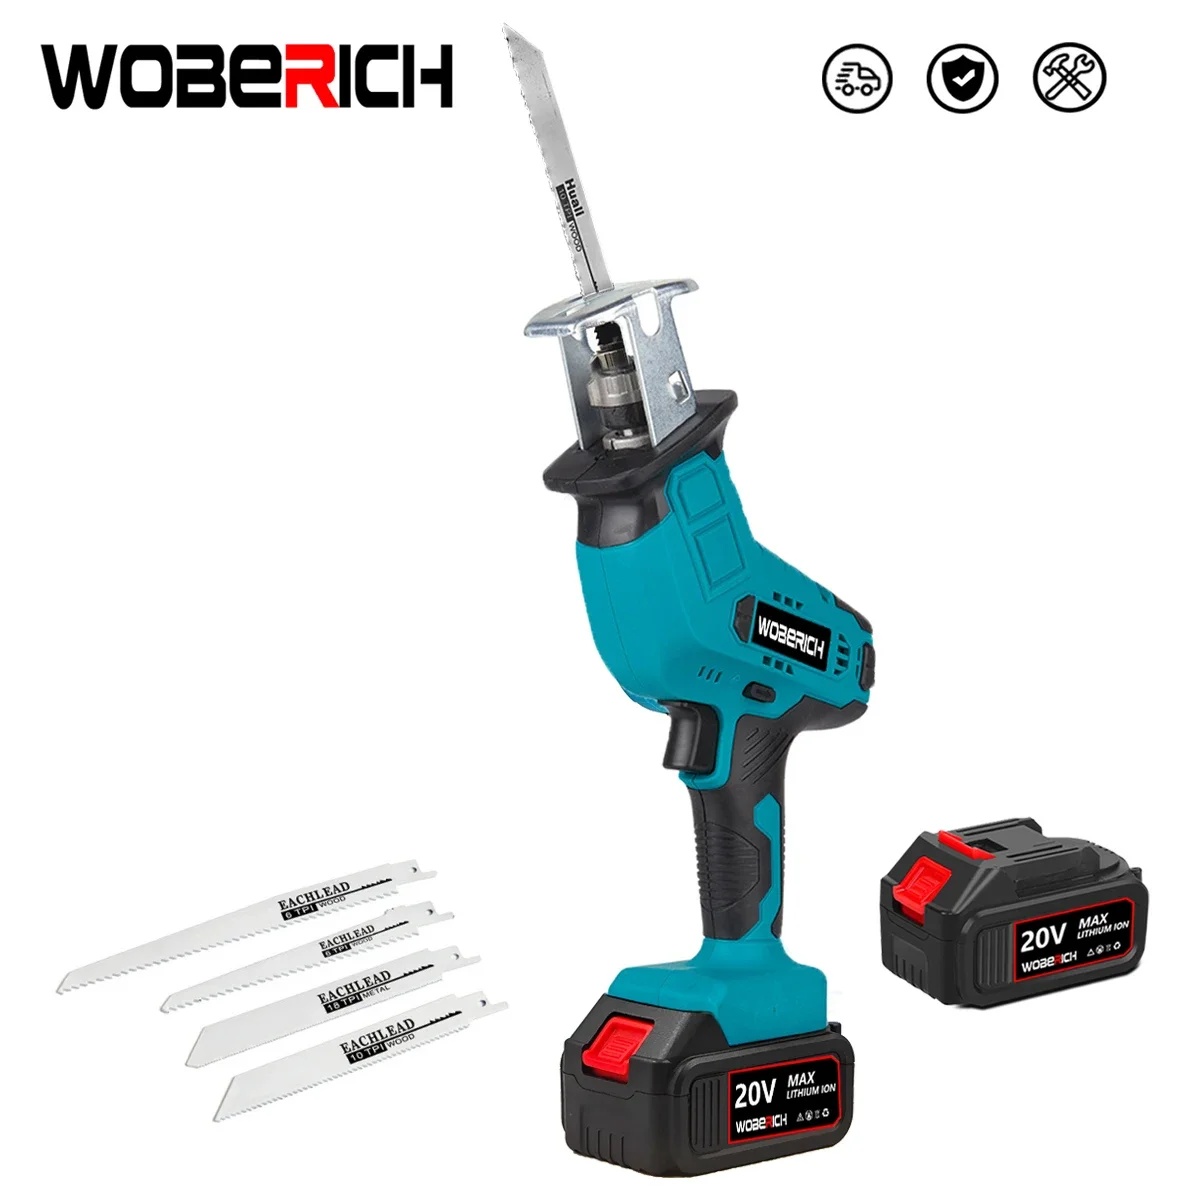 Cordless Reciprocating Saw 18V Adjustable Speed Electric Saw Wood Metal PVC Pipe Cutting fit Makita 18v Battery By WOBERICH cordless straight nail gun hire bunnings for wood fence lithium battery tools for pipe installation